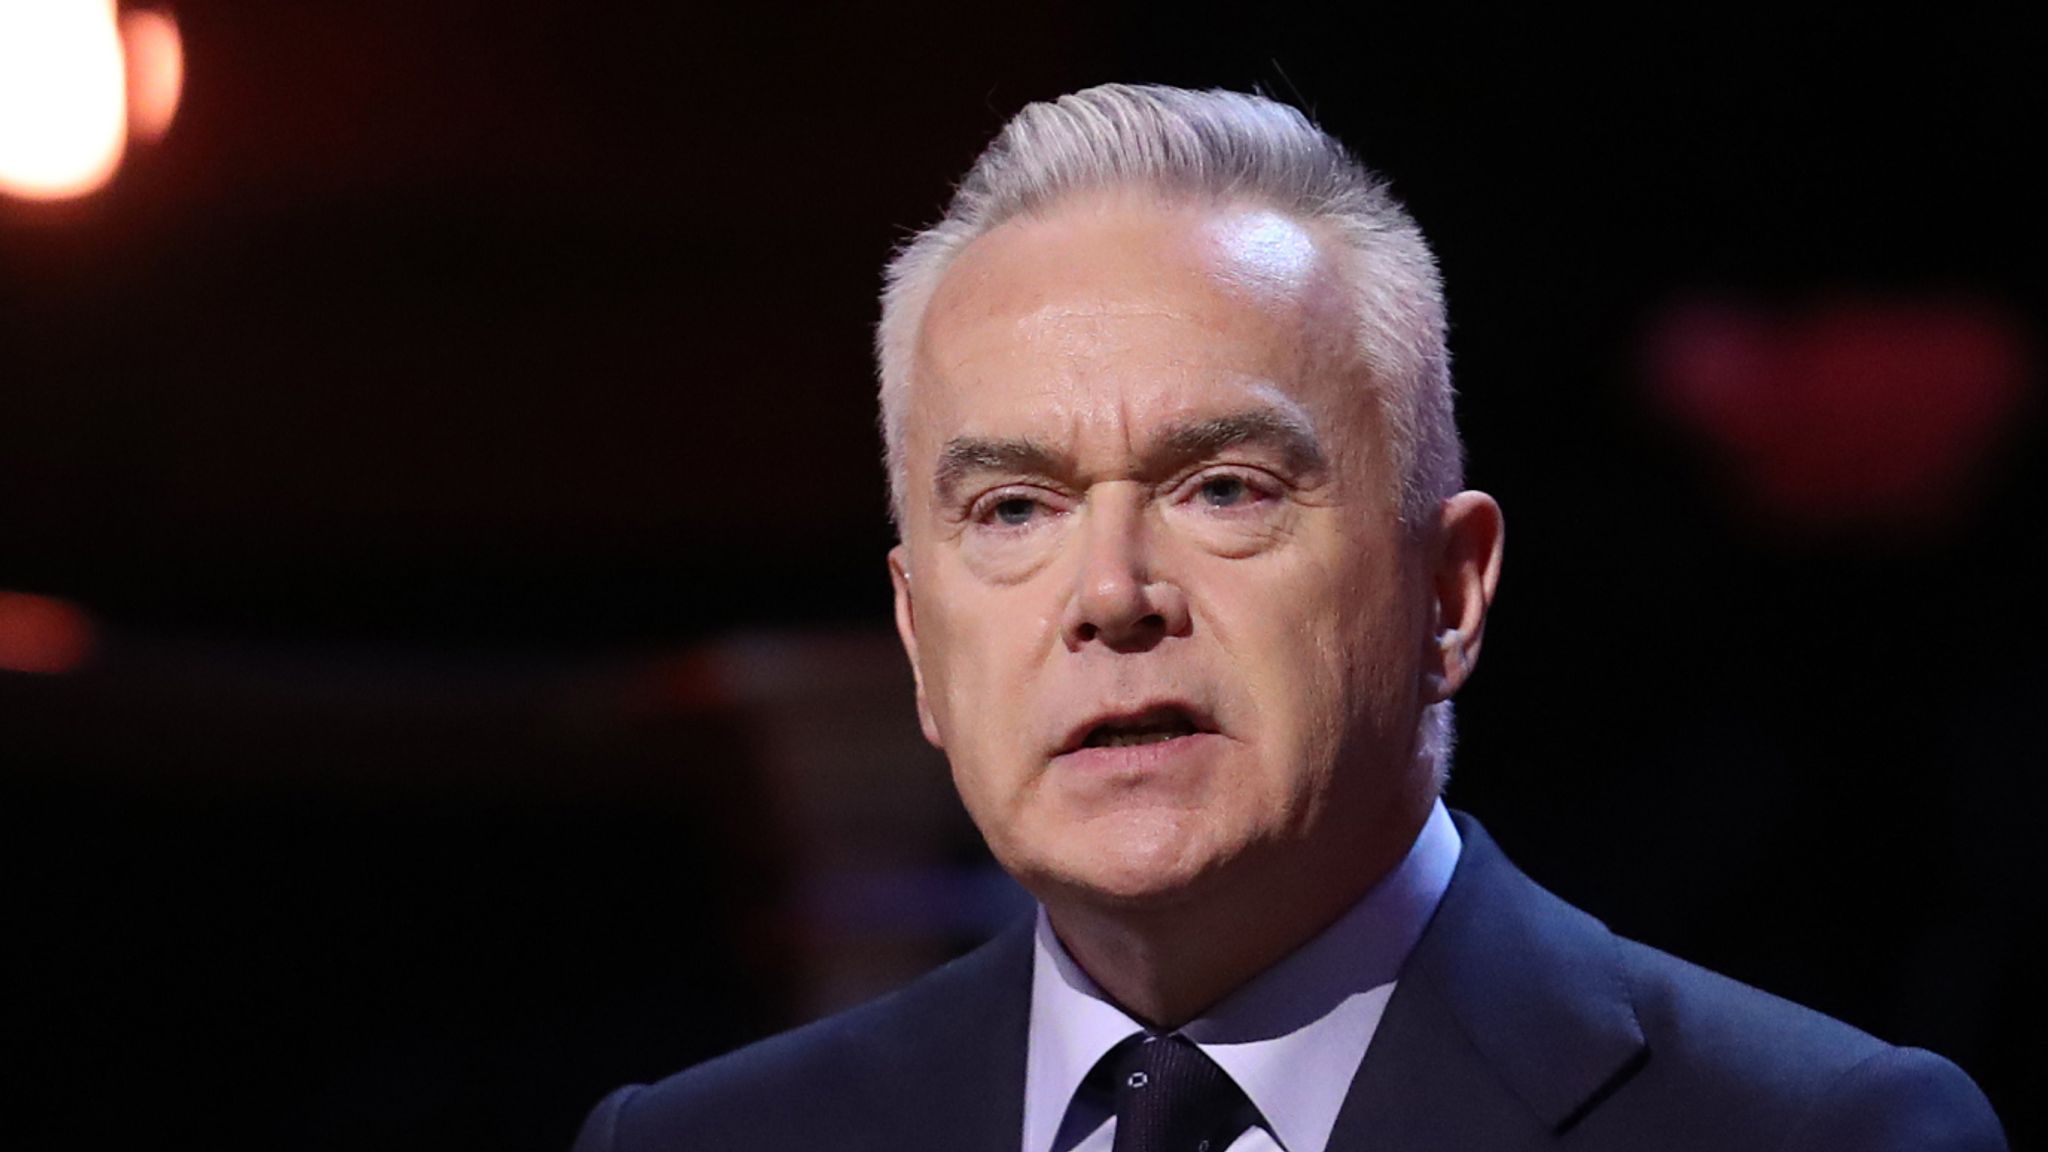 Huw Edwards named by his wife as BBC presenter accused of paying teen for explicit pictures UK News Sky News